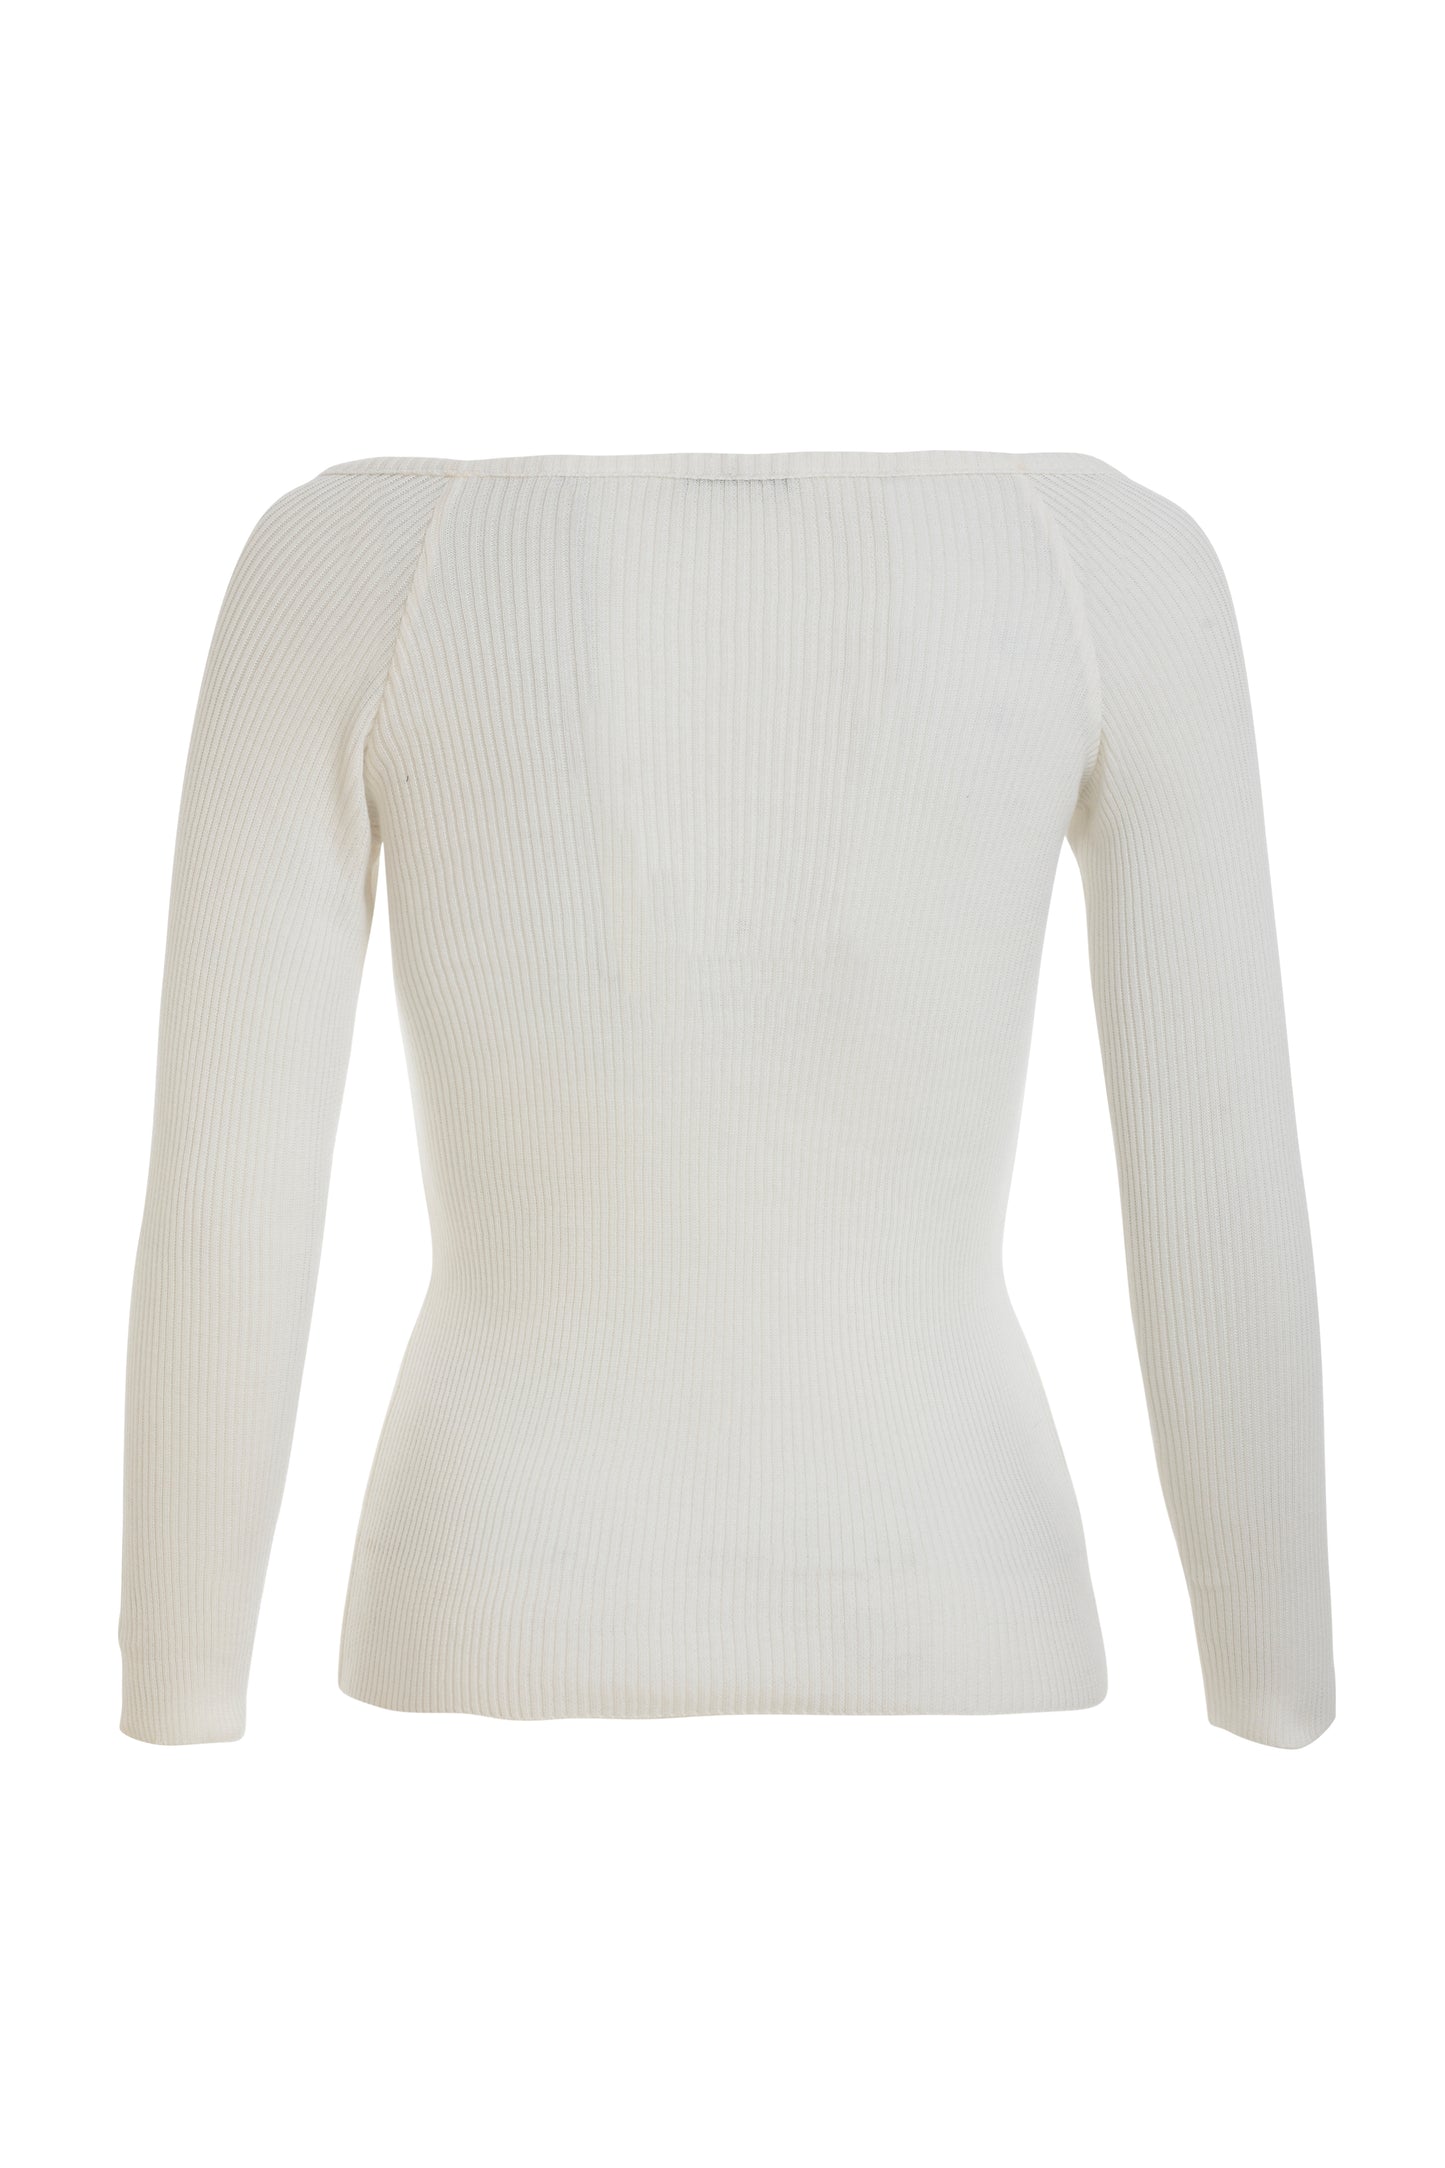 Prada white knitted top with floral beaded neckline